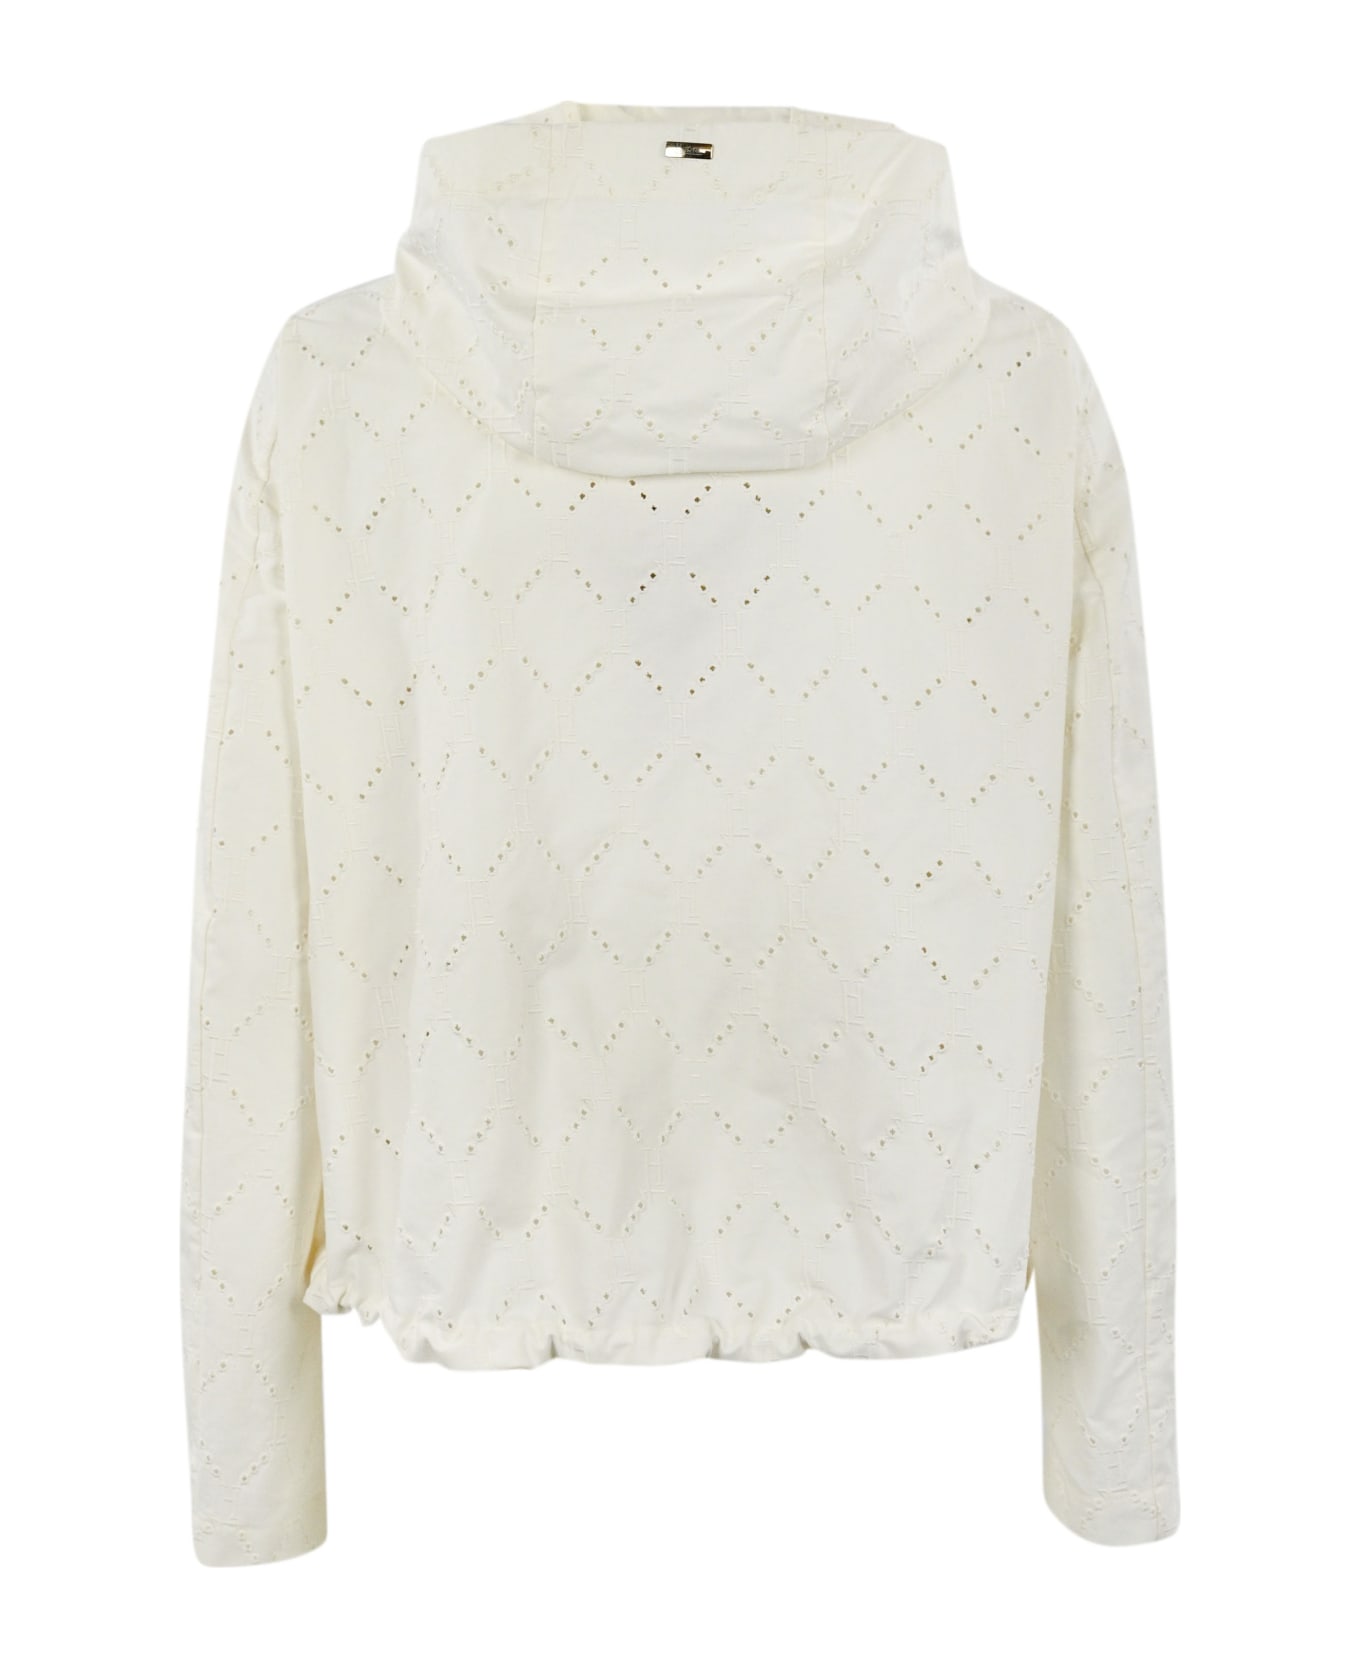 Herno Perforated Jacket With Hood - White ジャケット